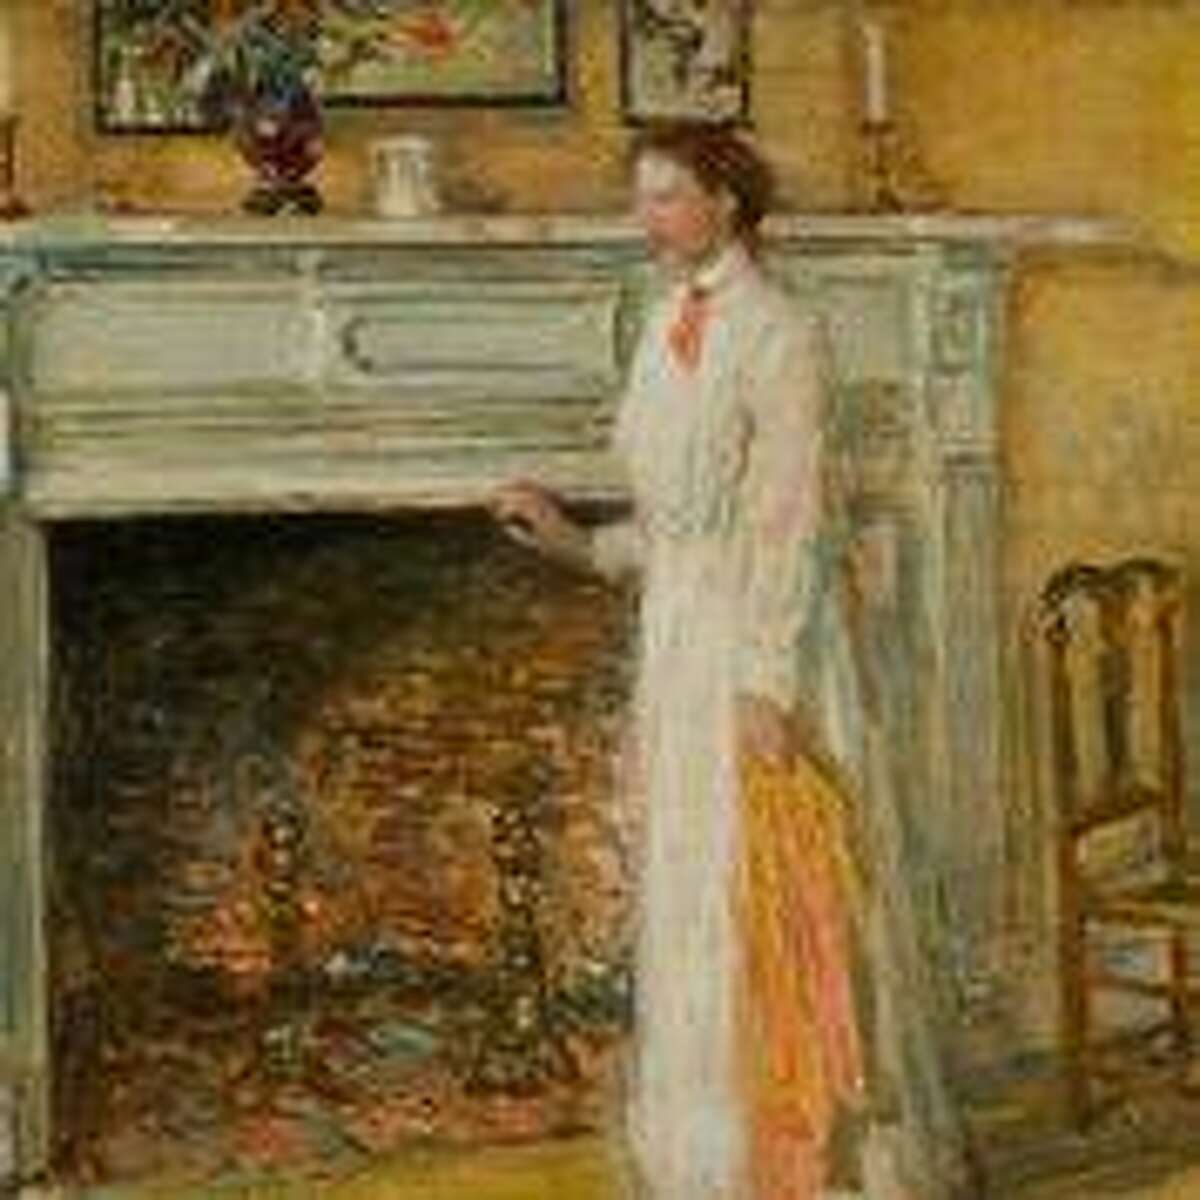 Childe Hassam’s “The Mantelpiece,” (1912, Oil on wood, cigar box lid) will be part of a new exhibit at the Greenwich Historical Society.